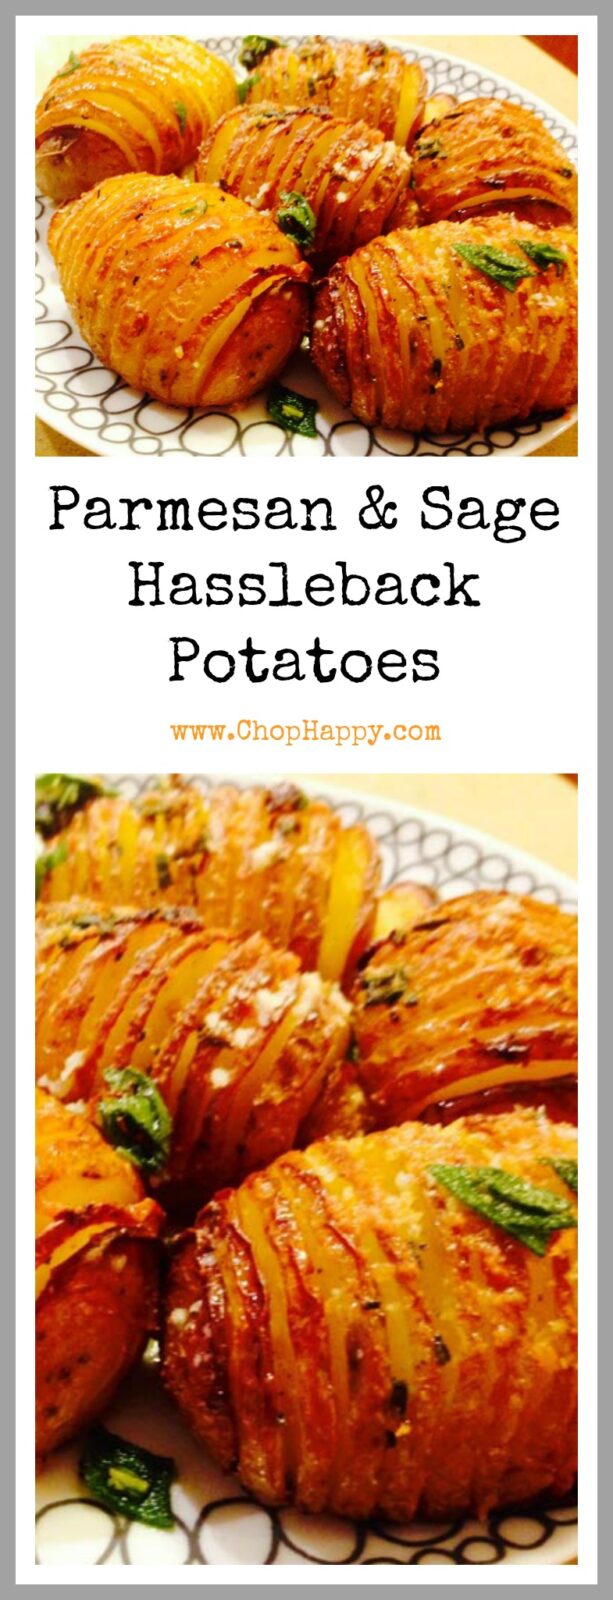 Parmesan and Sage Hassleback Potatoes - are so easy to make and look wonderfully yummy. Grab yukon gold potatoes, cheese, and sage. Perfect Thanksgiving recipe. www.ChopHappy.com